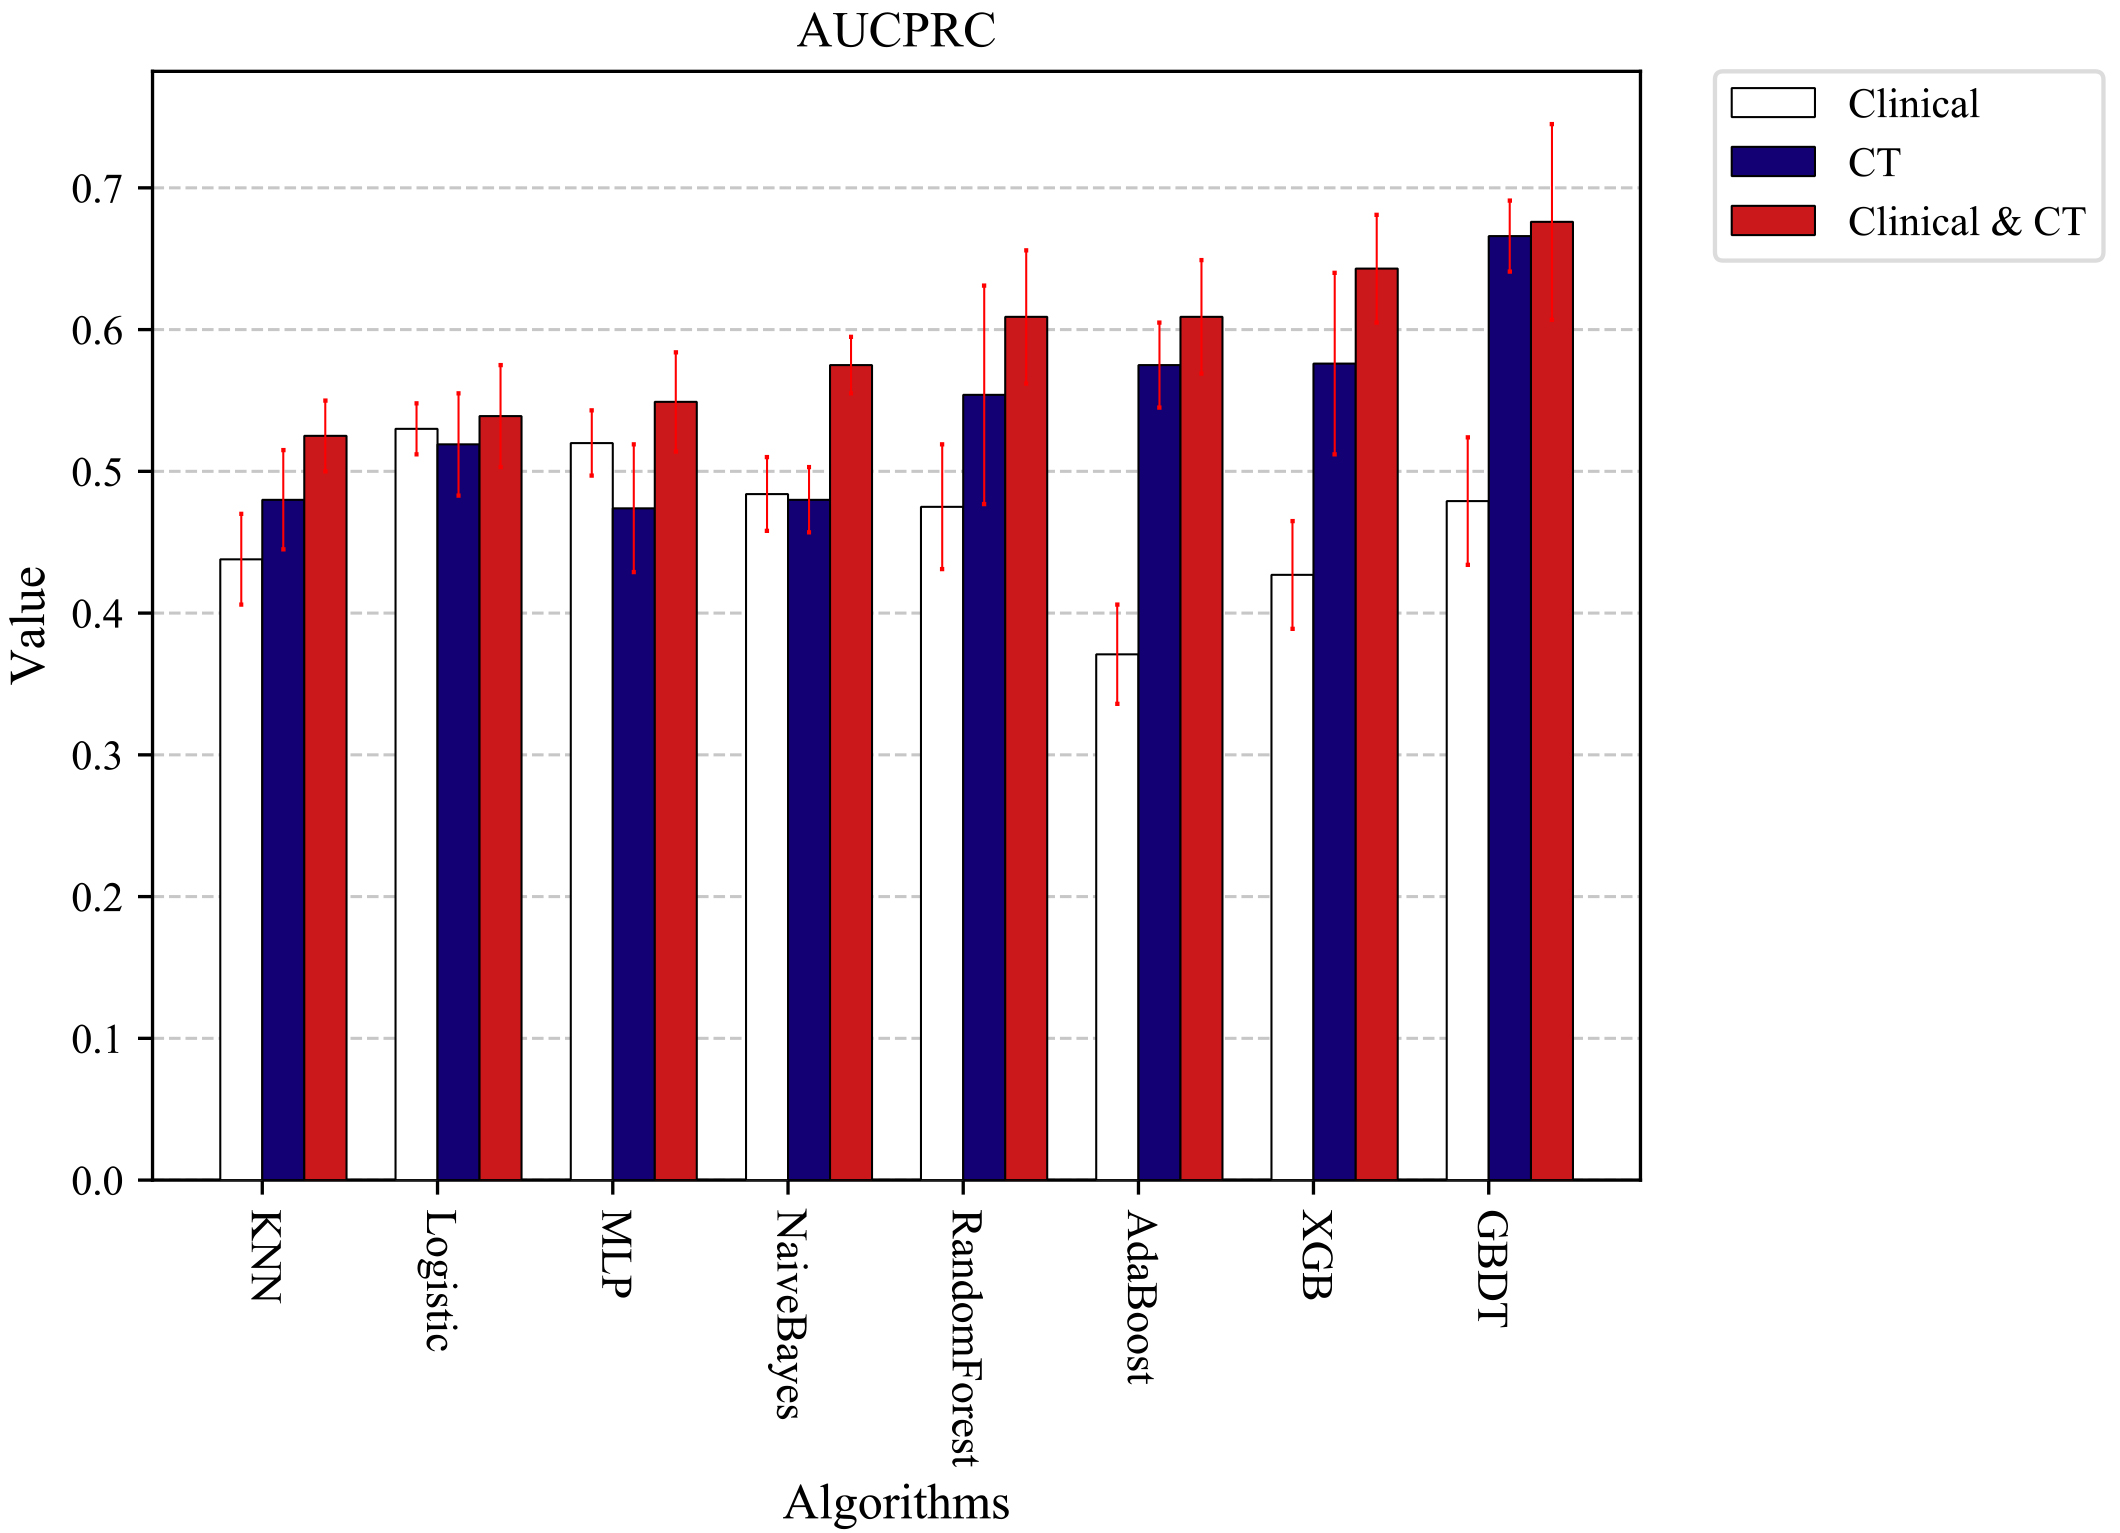 Experimental results of AUCPRC obtained by various machine learning algorithms using different types of features.